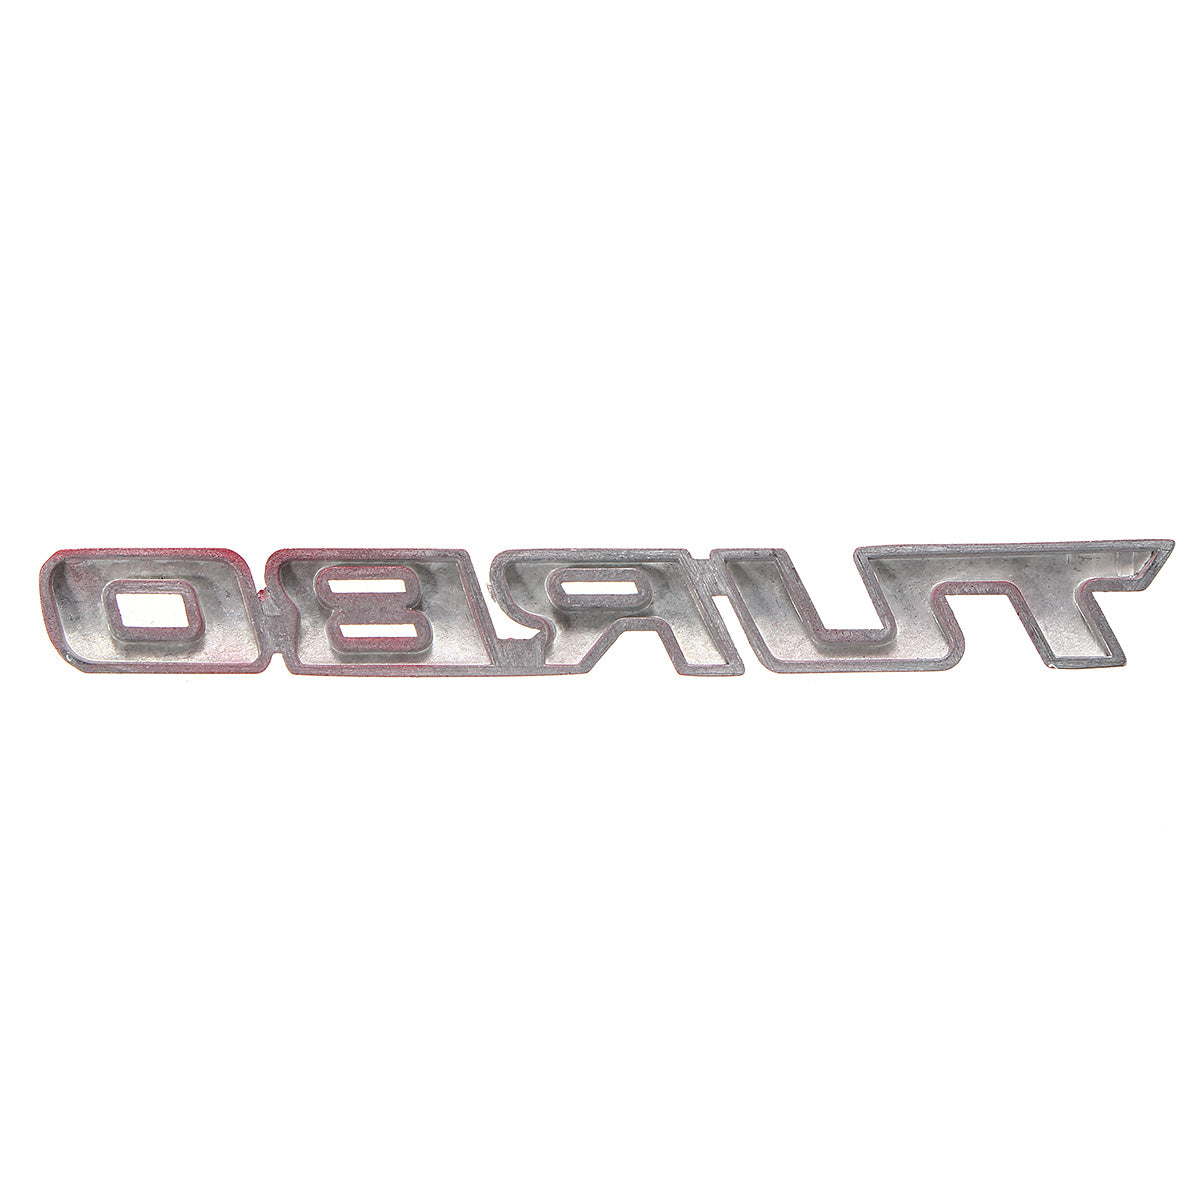 Dark Gray Turbo 3D Metal Car Decals Lettering Badge Sticker for Auto Body Rear Tailgate